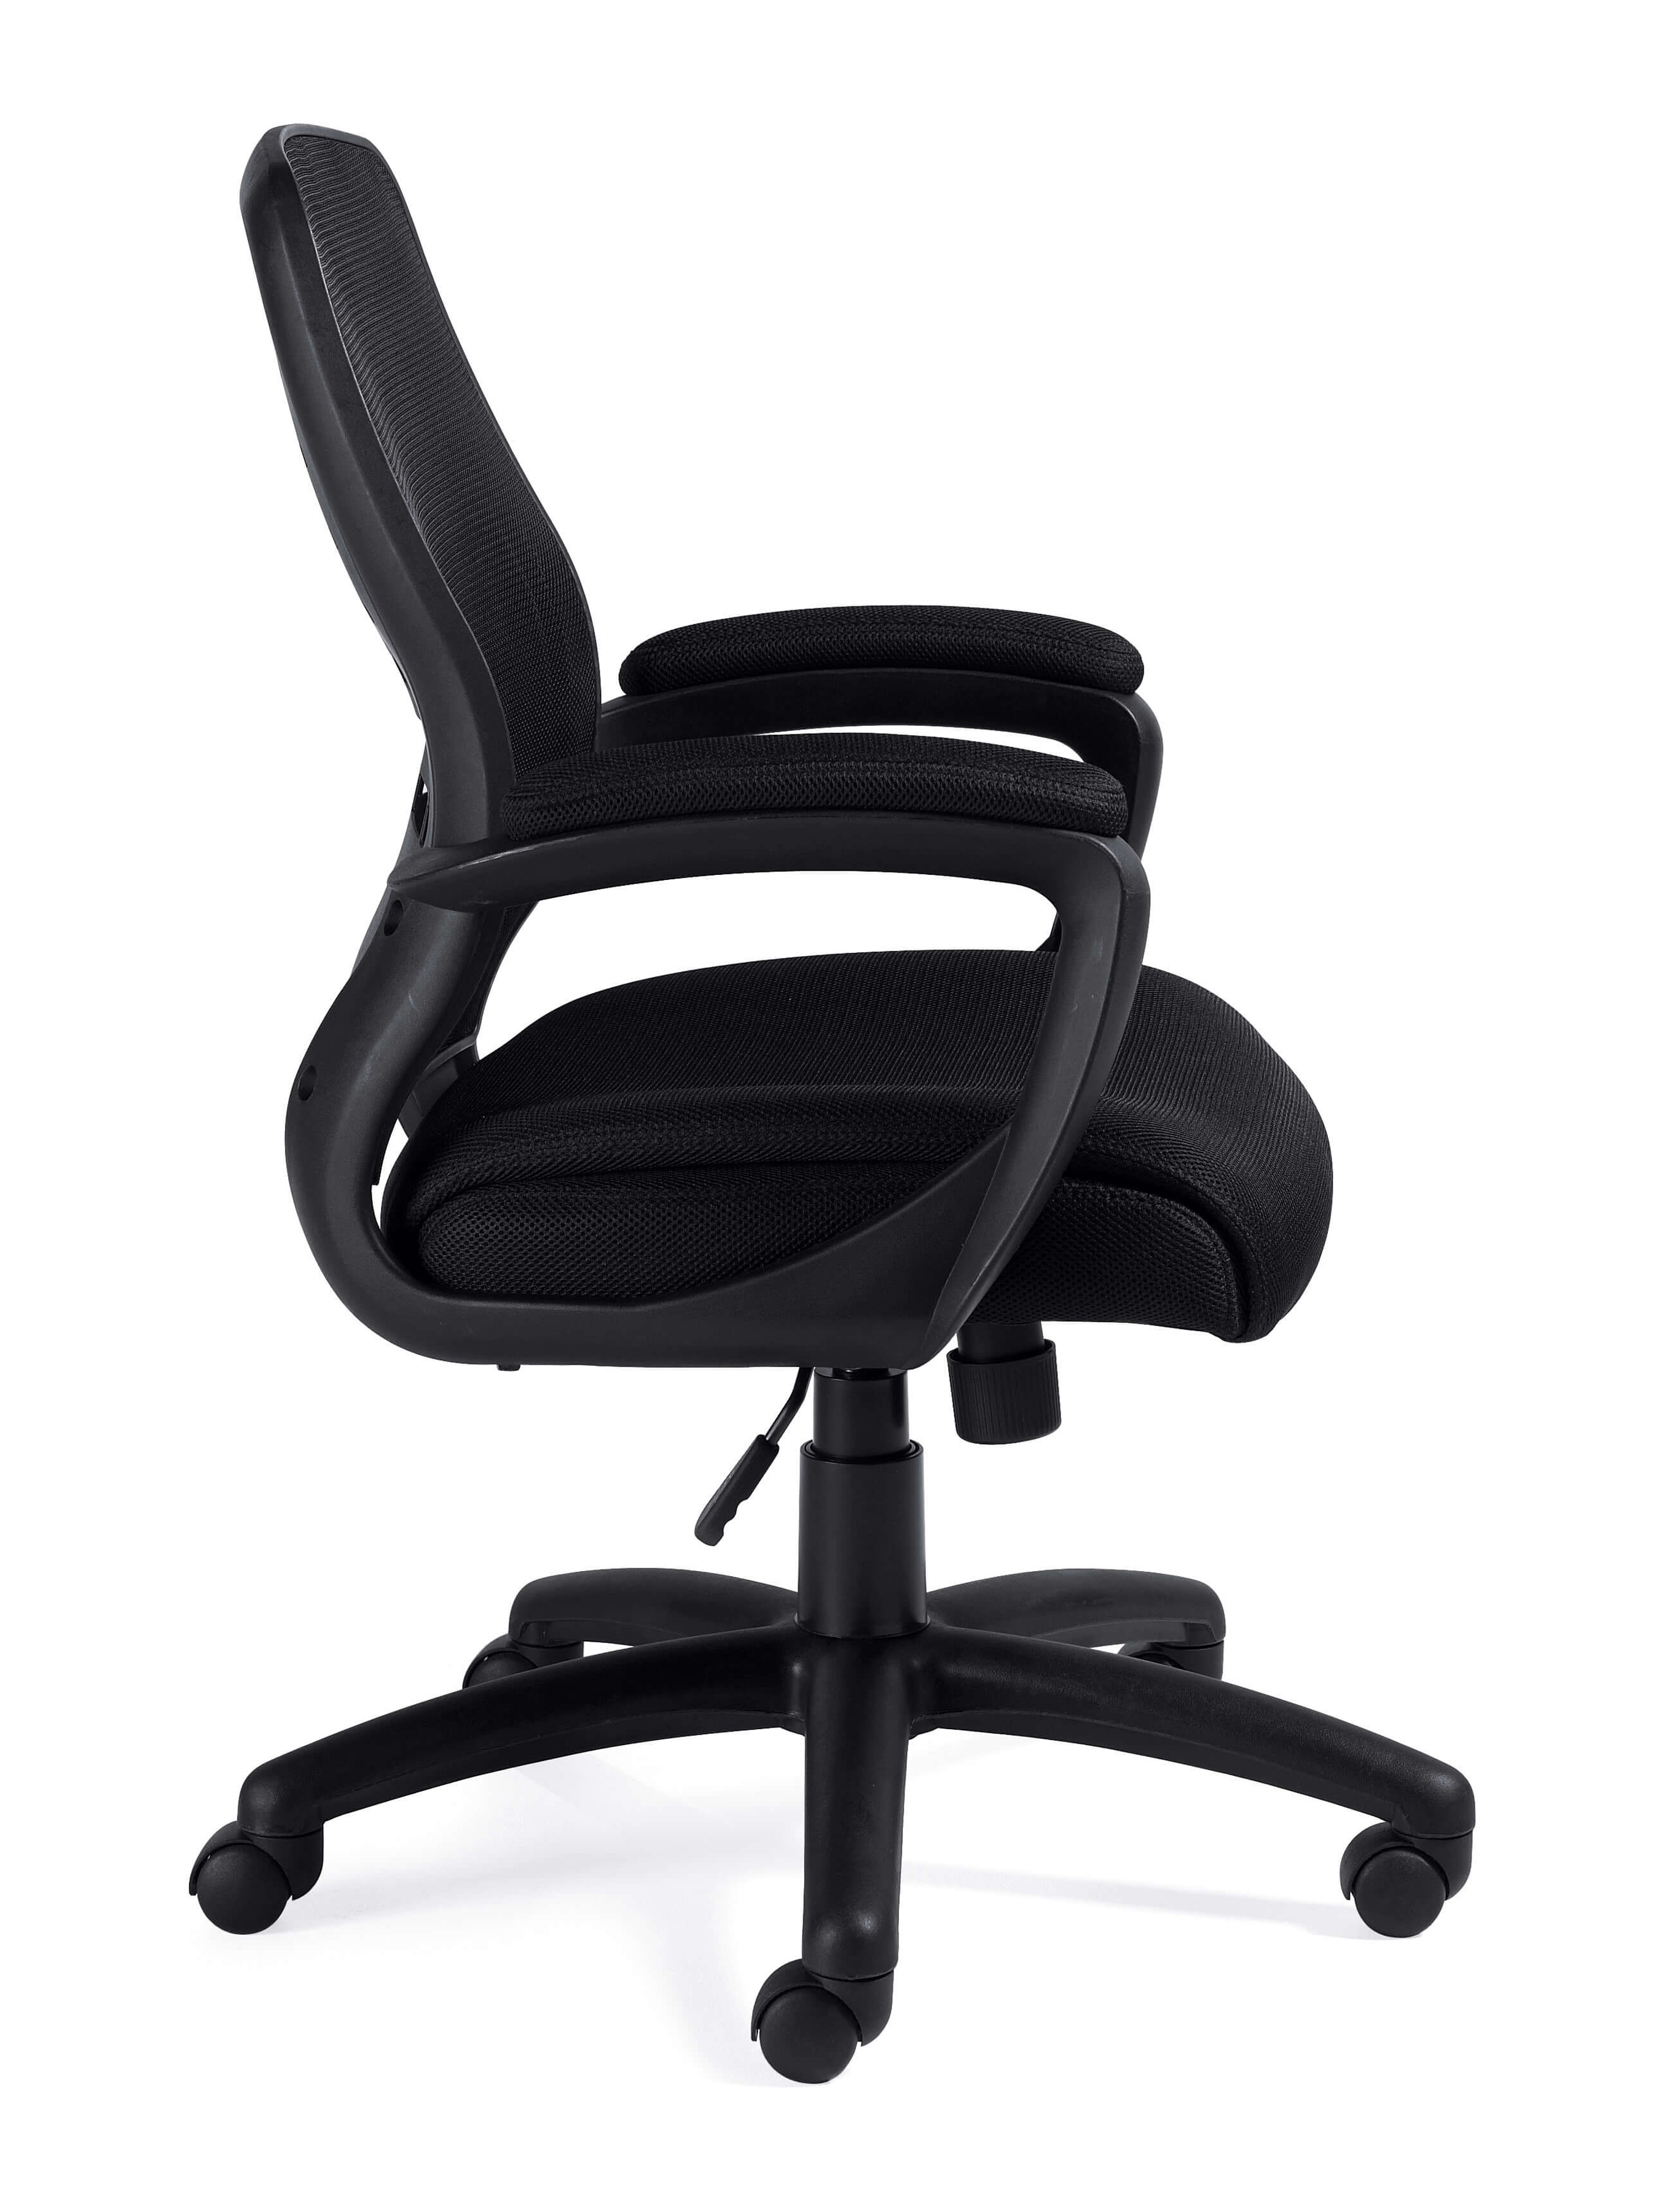 Comfortable desk chairs side view